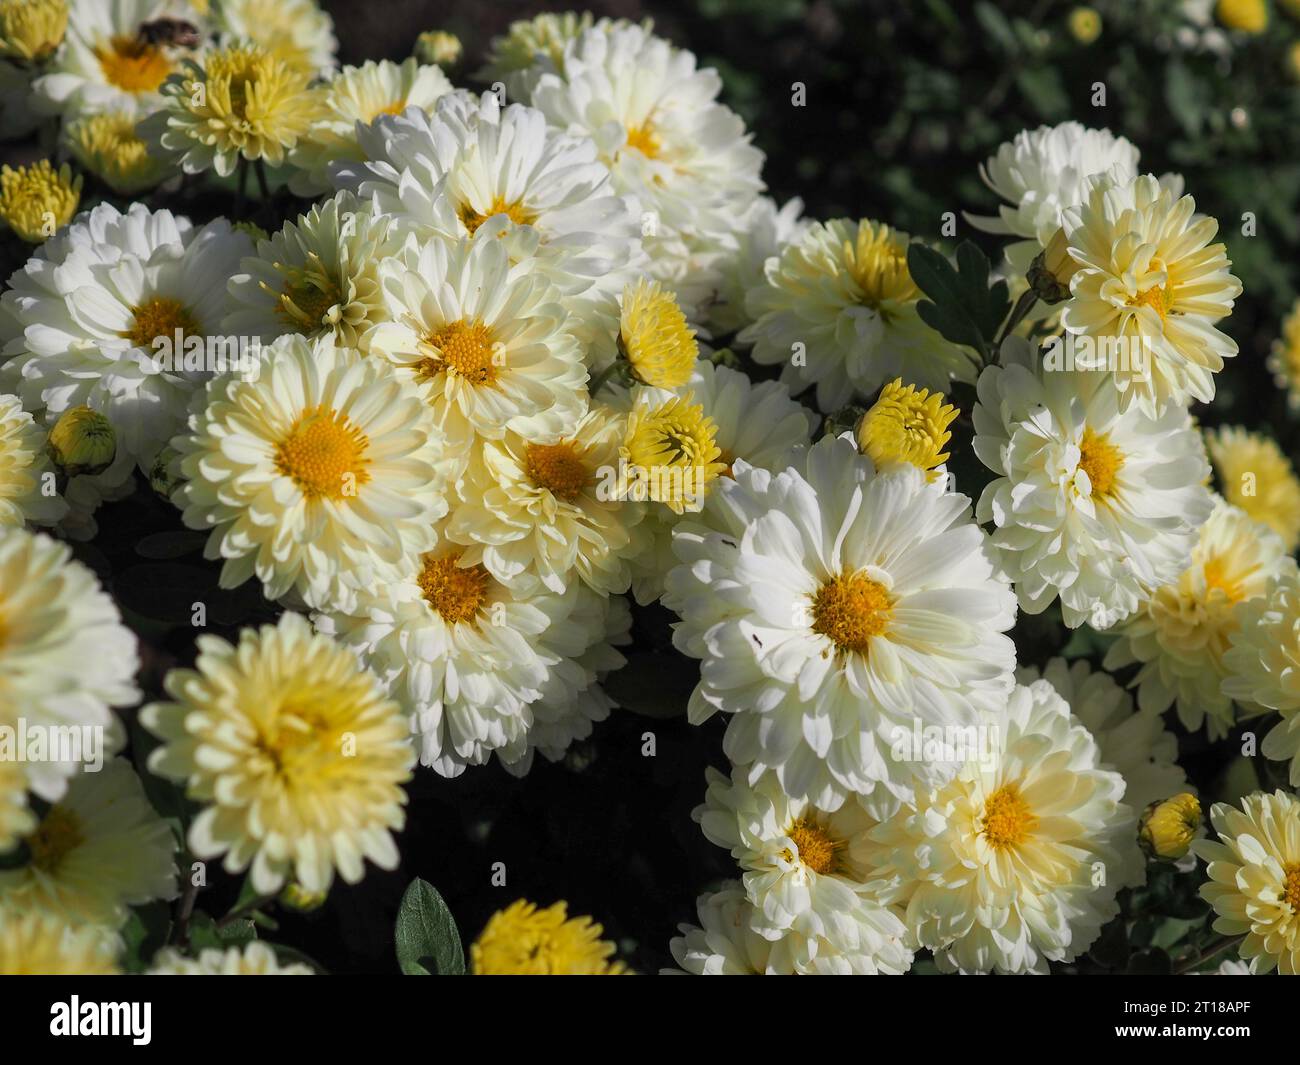 Close up of the hardy white / cream / yellow double flowers of Chrysanthemum 'Poesie' in the autumn sunshine in a British garden in October. Stock Photo